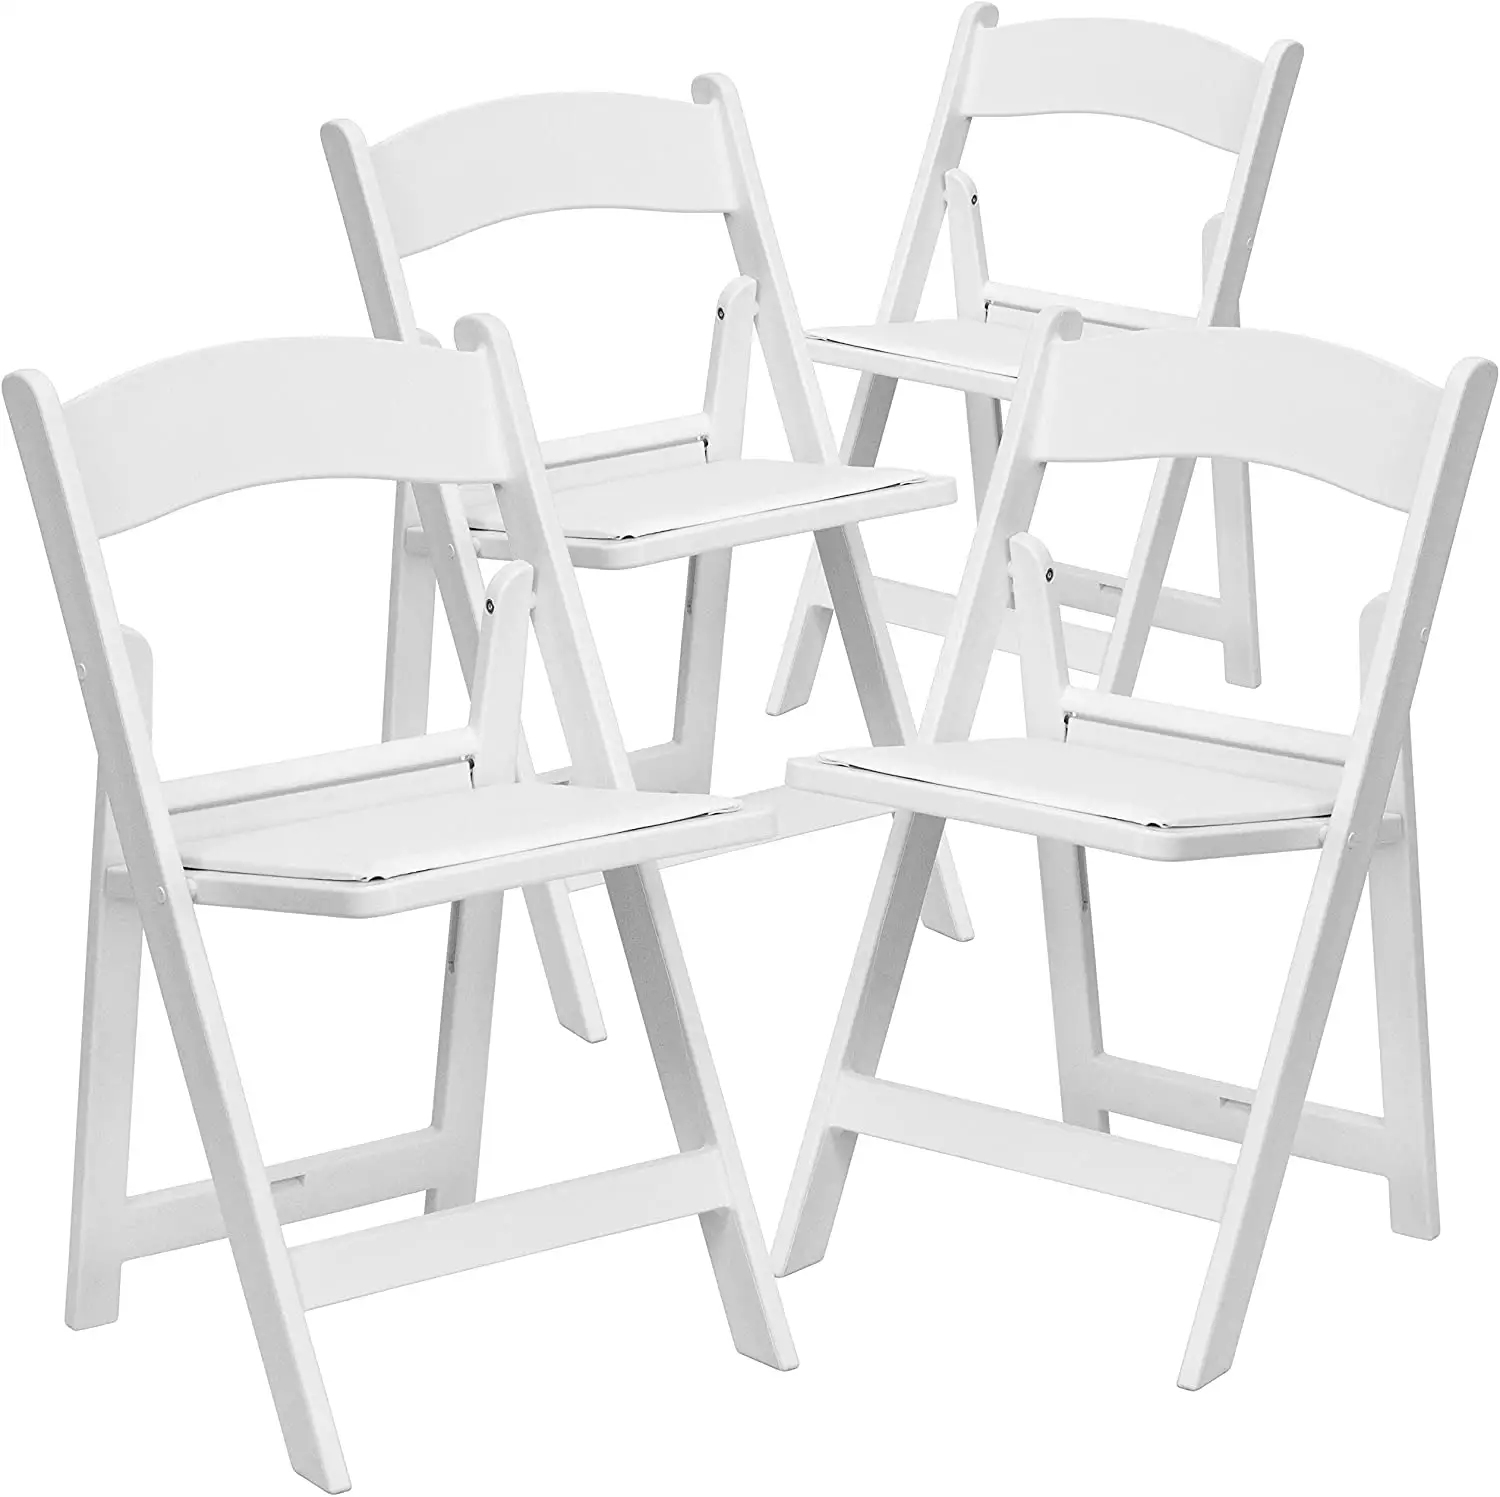 Luxury Foldable Stackable Plastic Acrylic Hotel Chairs White Banquet Wedding Chairs for Events Restaurant Party Wedding